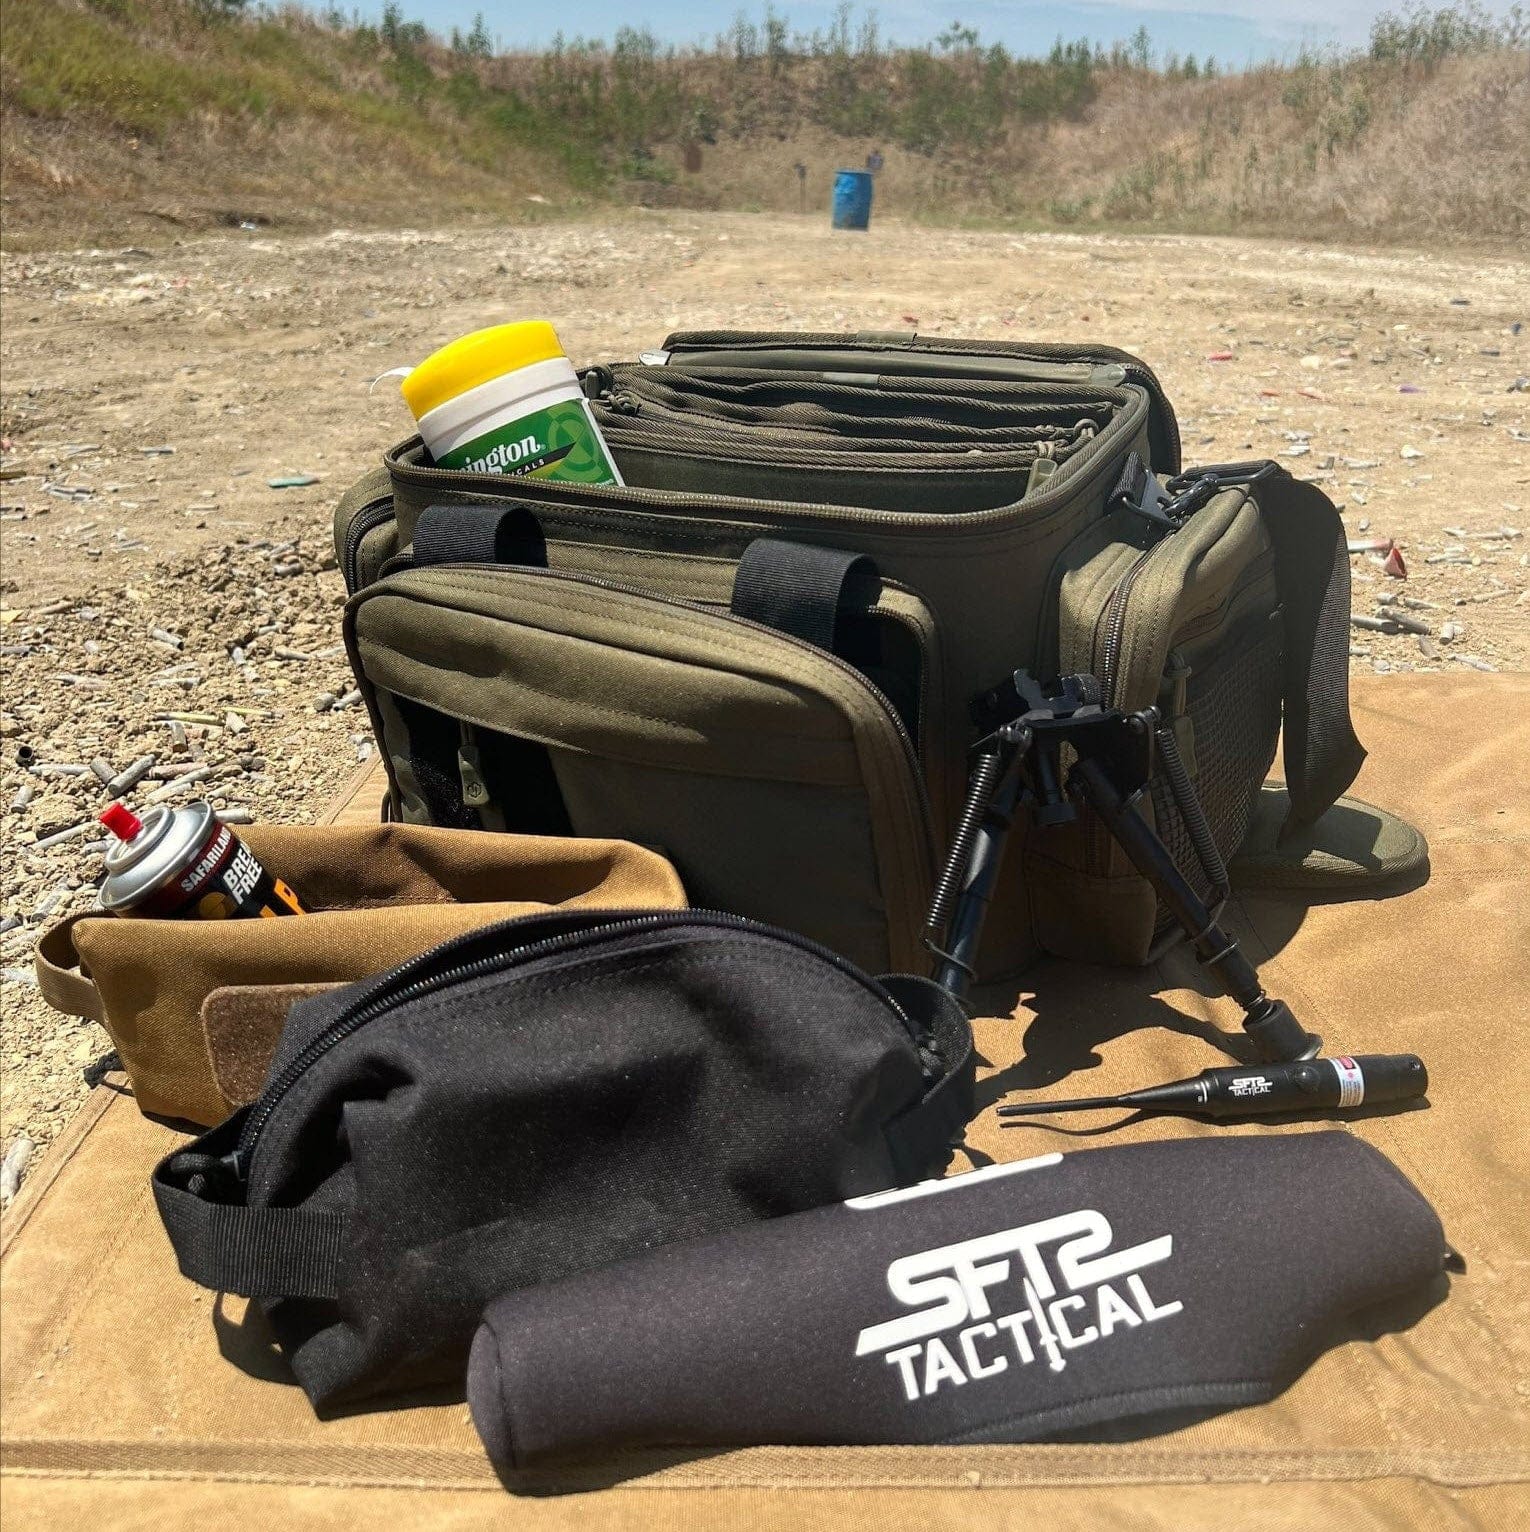 Range Day Package